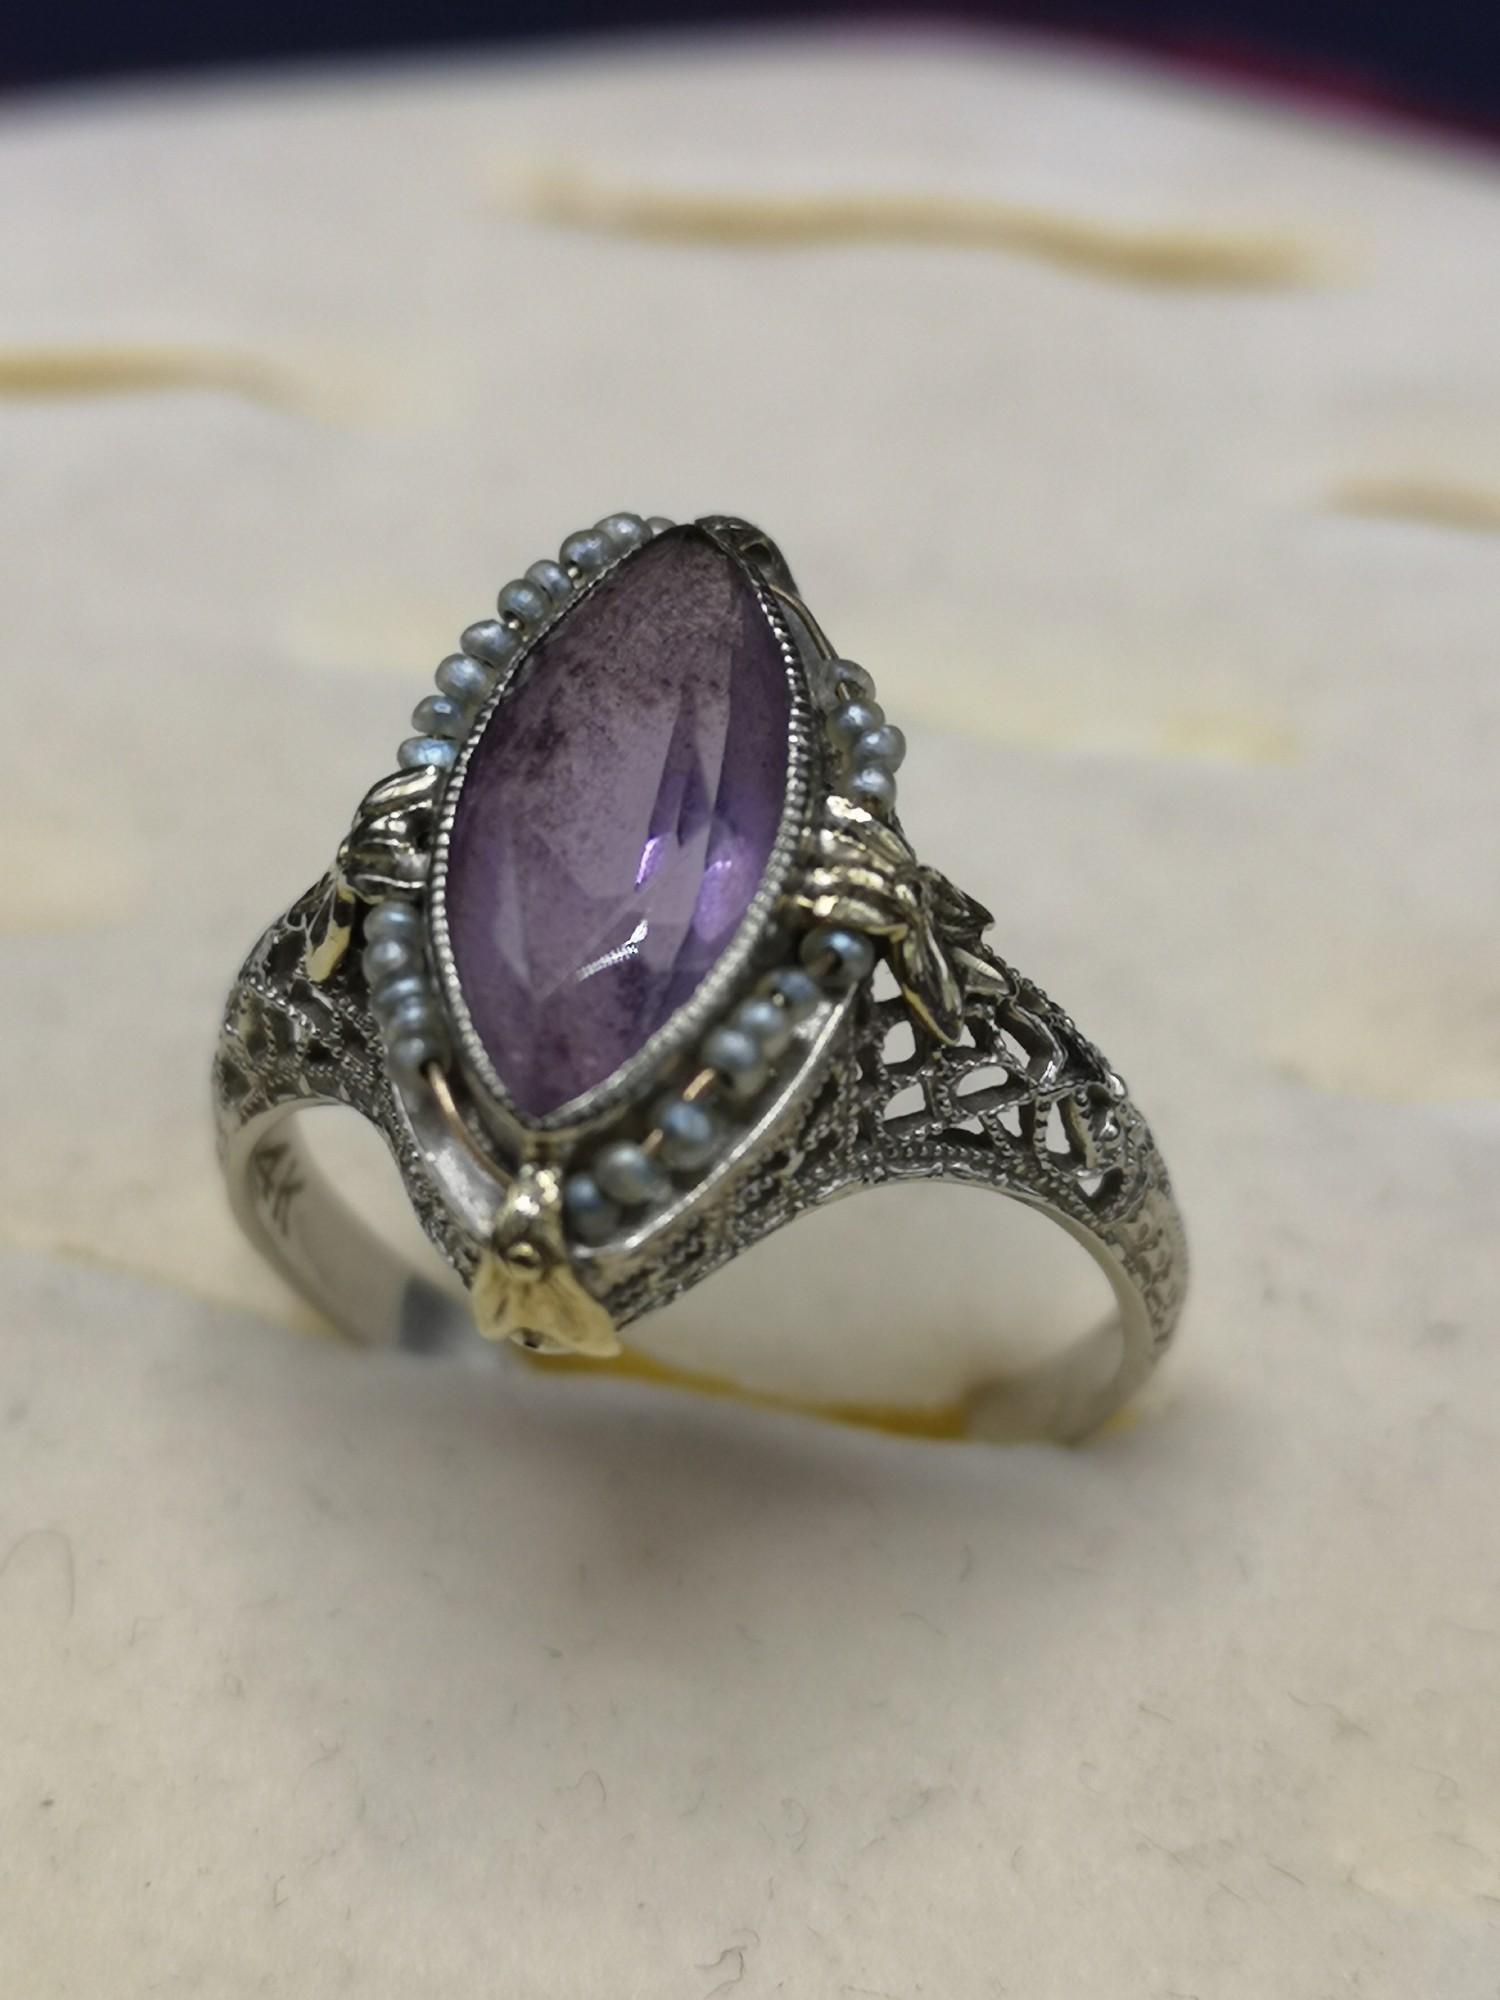 14k white gold art deco ring set in ameymst. 3 grams. Does have damage. - Image 2 of 3